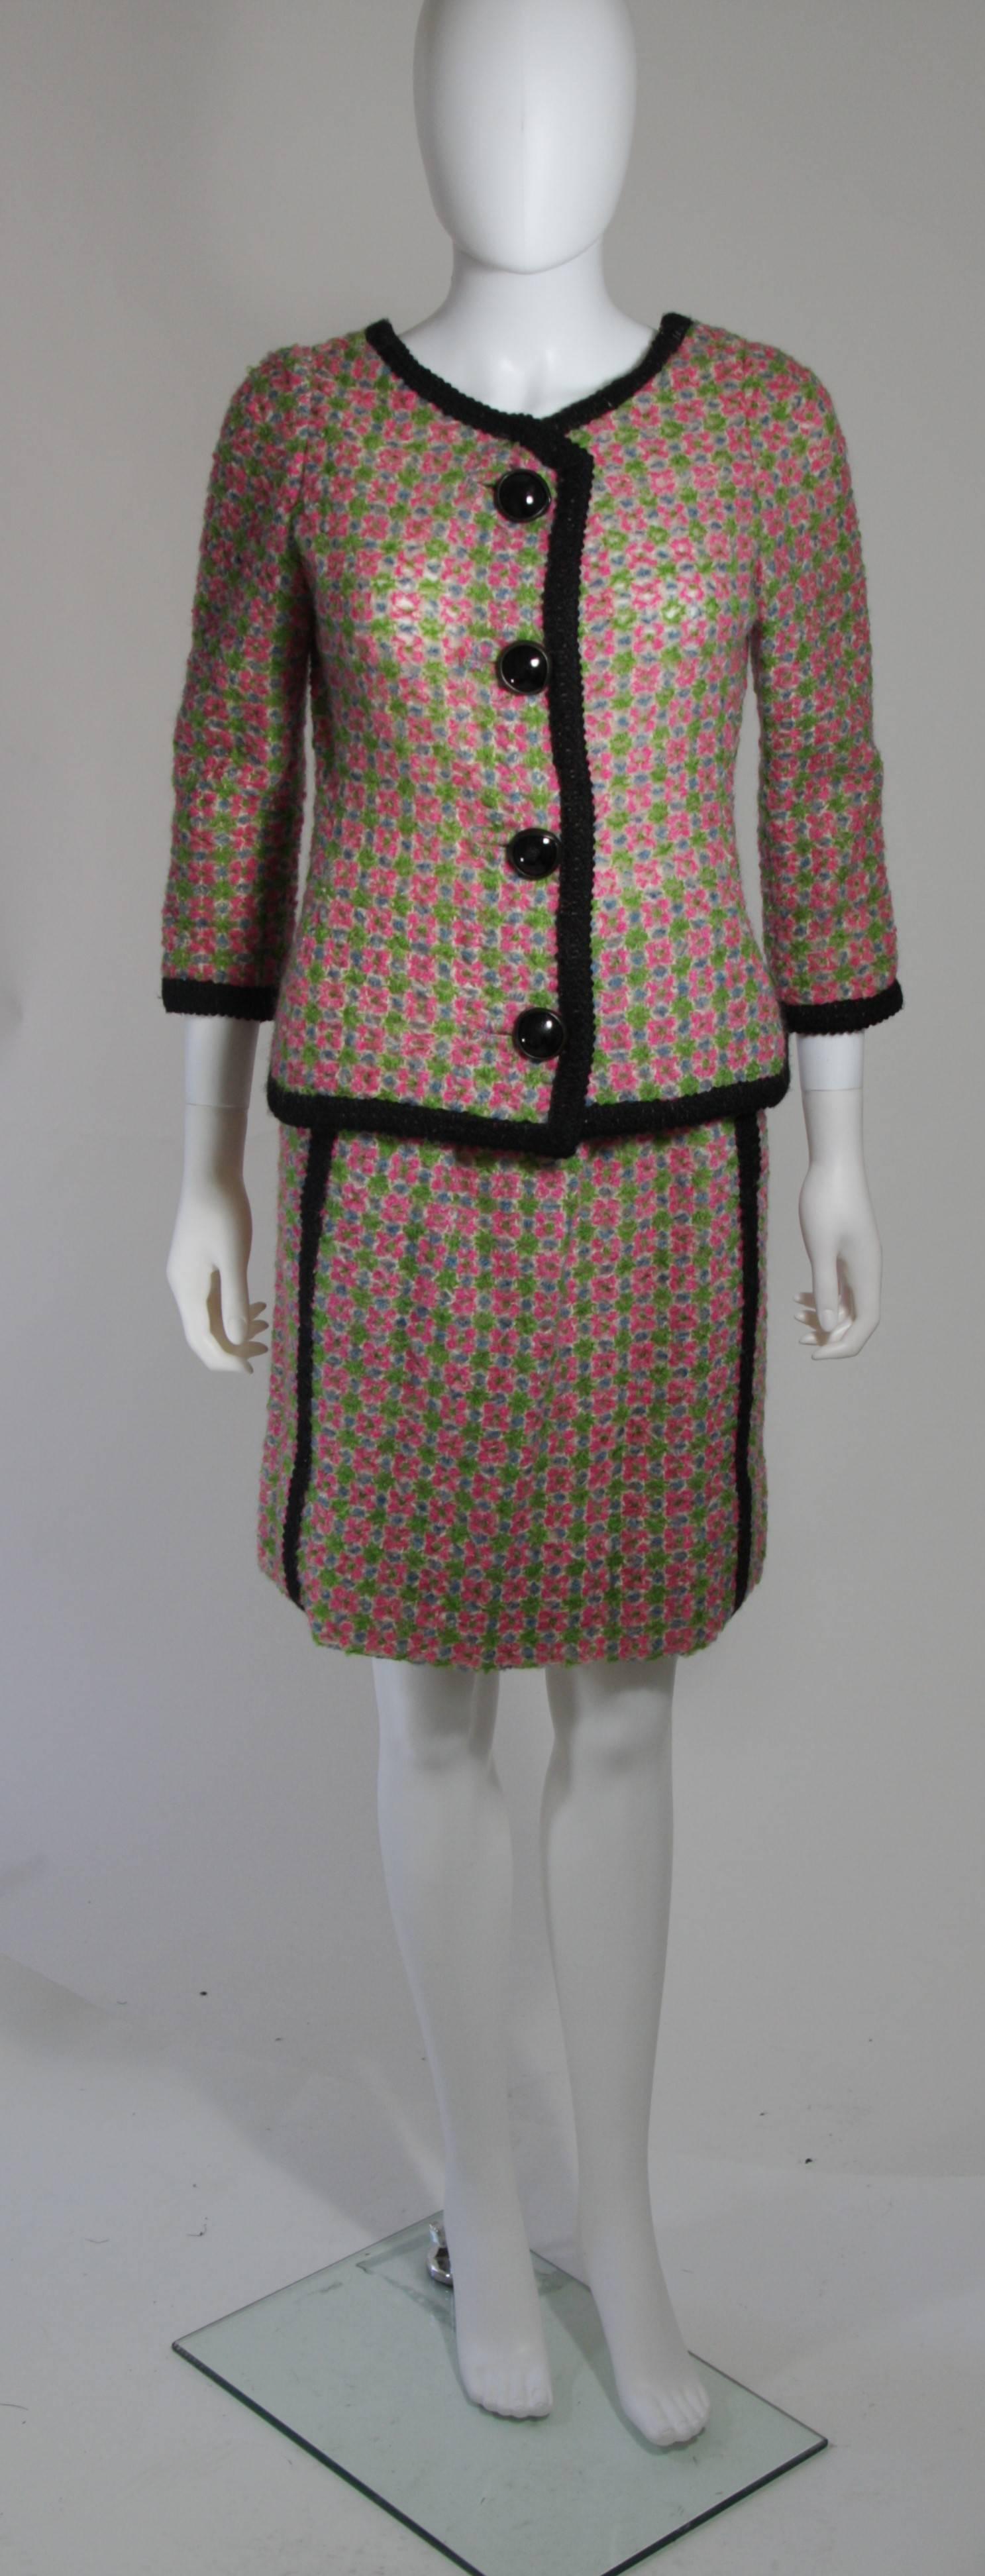 This Galanos skirt suit is composed of a knit wool fabric in green, pink, white, black color combination. The jacket features center front buttons. The set is accented with a black trim. The skirt features a side zipper and one side pocket. In